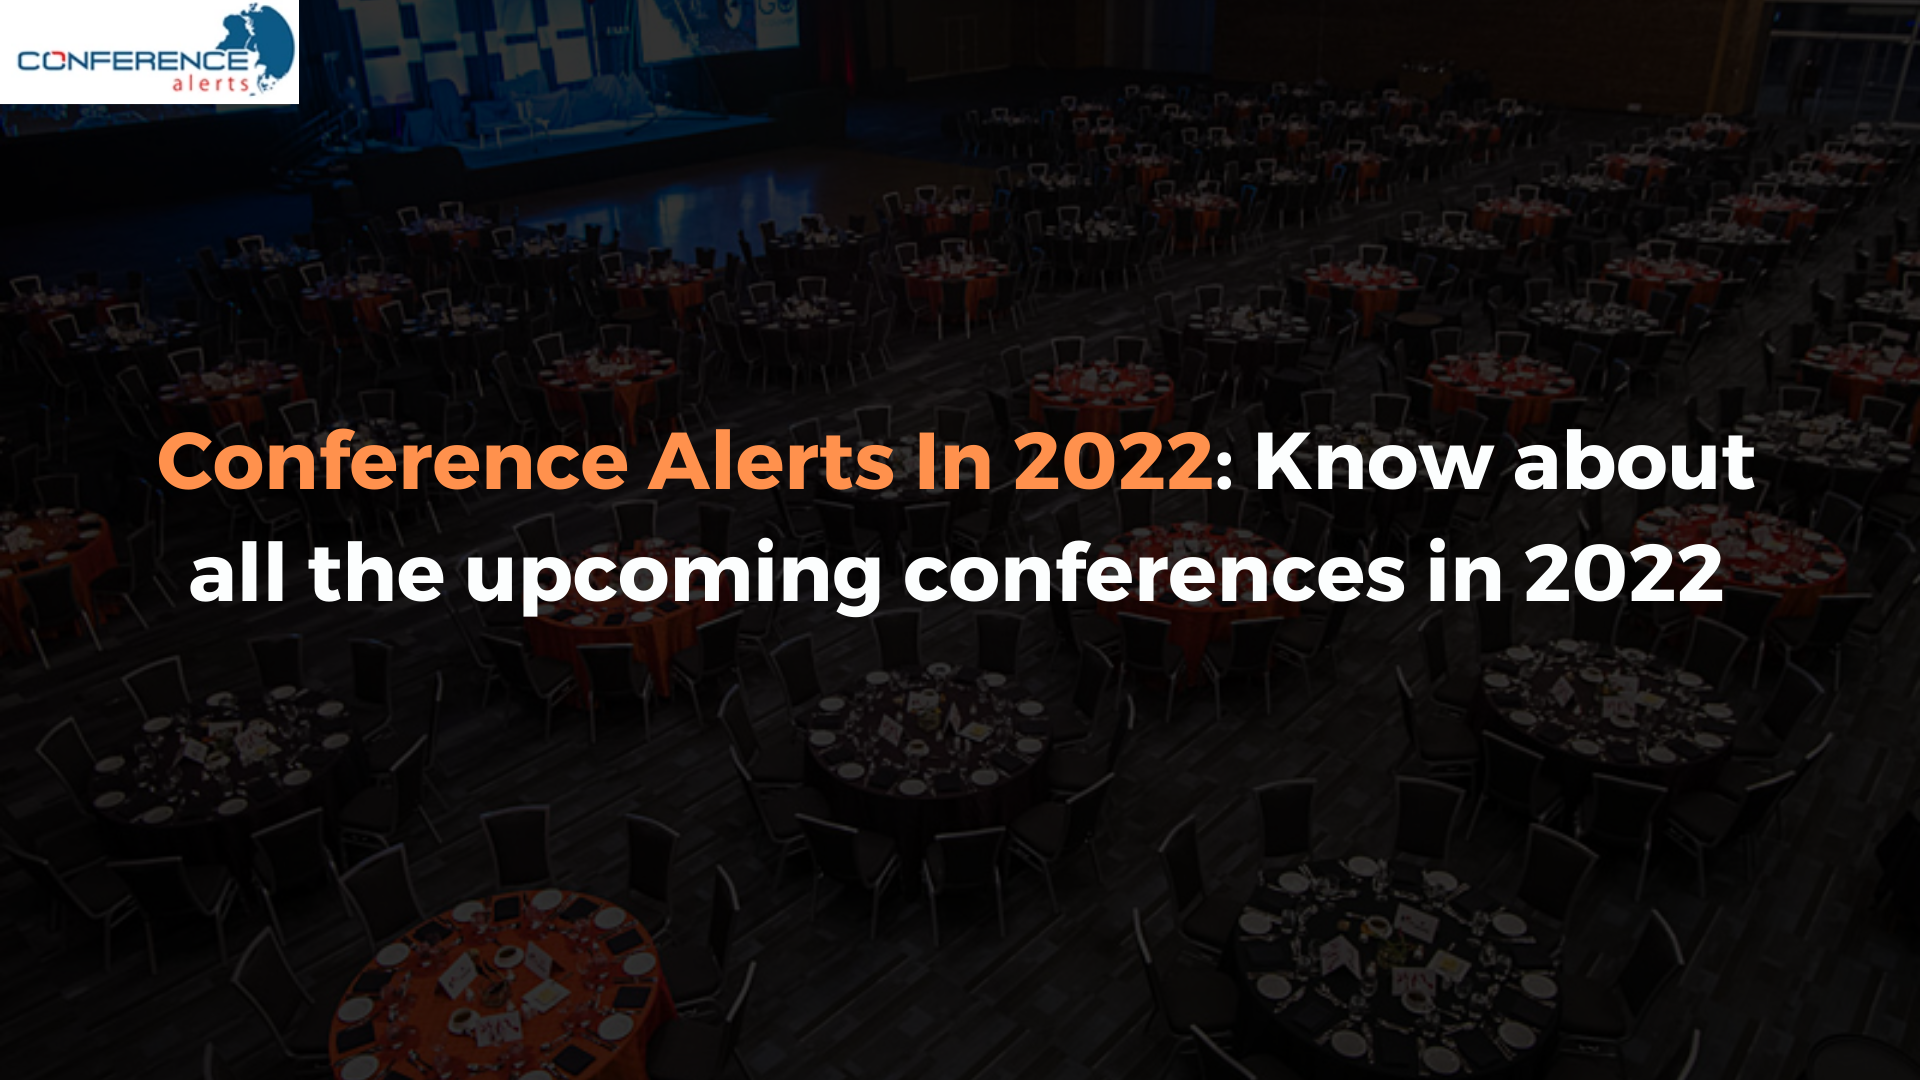 Conference Alerts in 2022 Know about the conferences in 2022